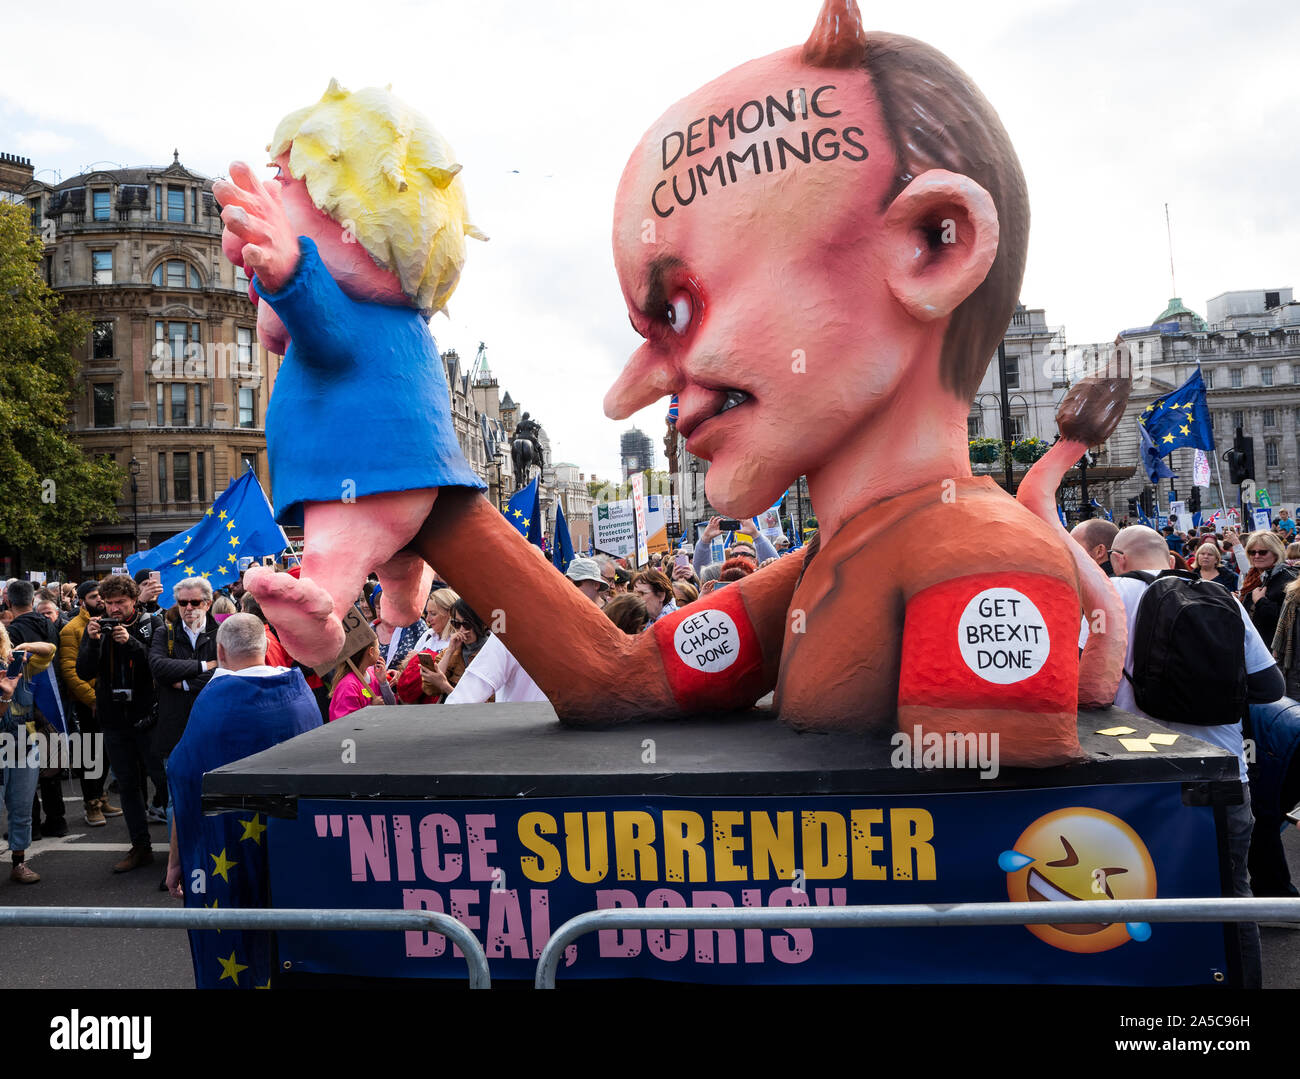 London, UK, 19 Oct 2019. Peoples Vote March. While Parliament debated the deal negotiated by PM Boris Johnson with the EU hundreds of thousands of anti Brexit protestors marched from Park Lane to Parliament Square. Pictured effigies of Boris Johnson and Dominic Cummings on small float parked in Trafalgar Square. Boris Johnson depicted as Dominic Cummings puppet. The Dominic Cummings effigy has horns and tail, and on forehead written Demonic Cummings. Credit: Stephen Bell/Alamy Stock Photo